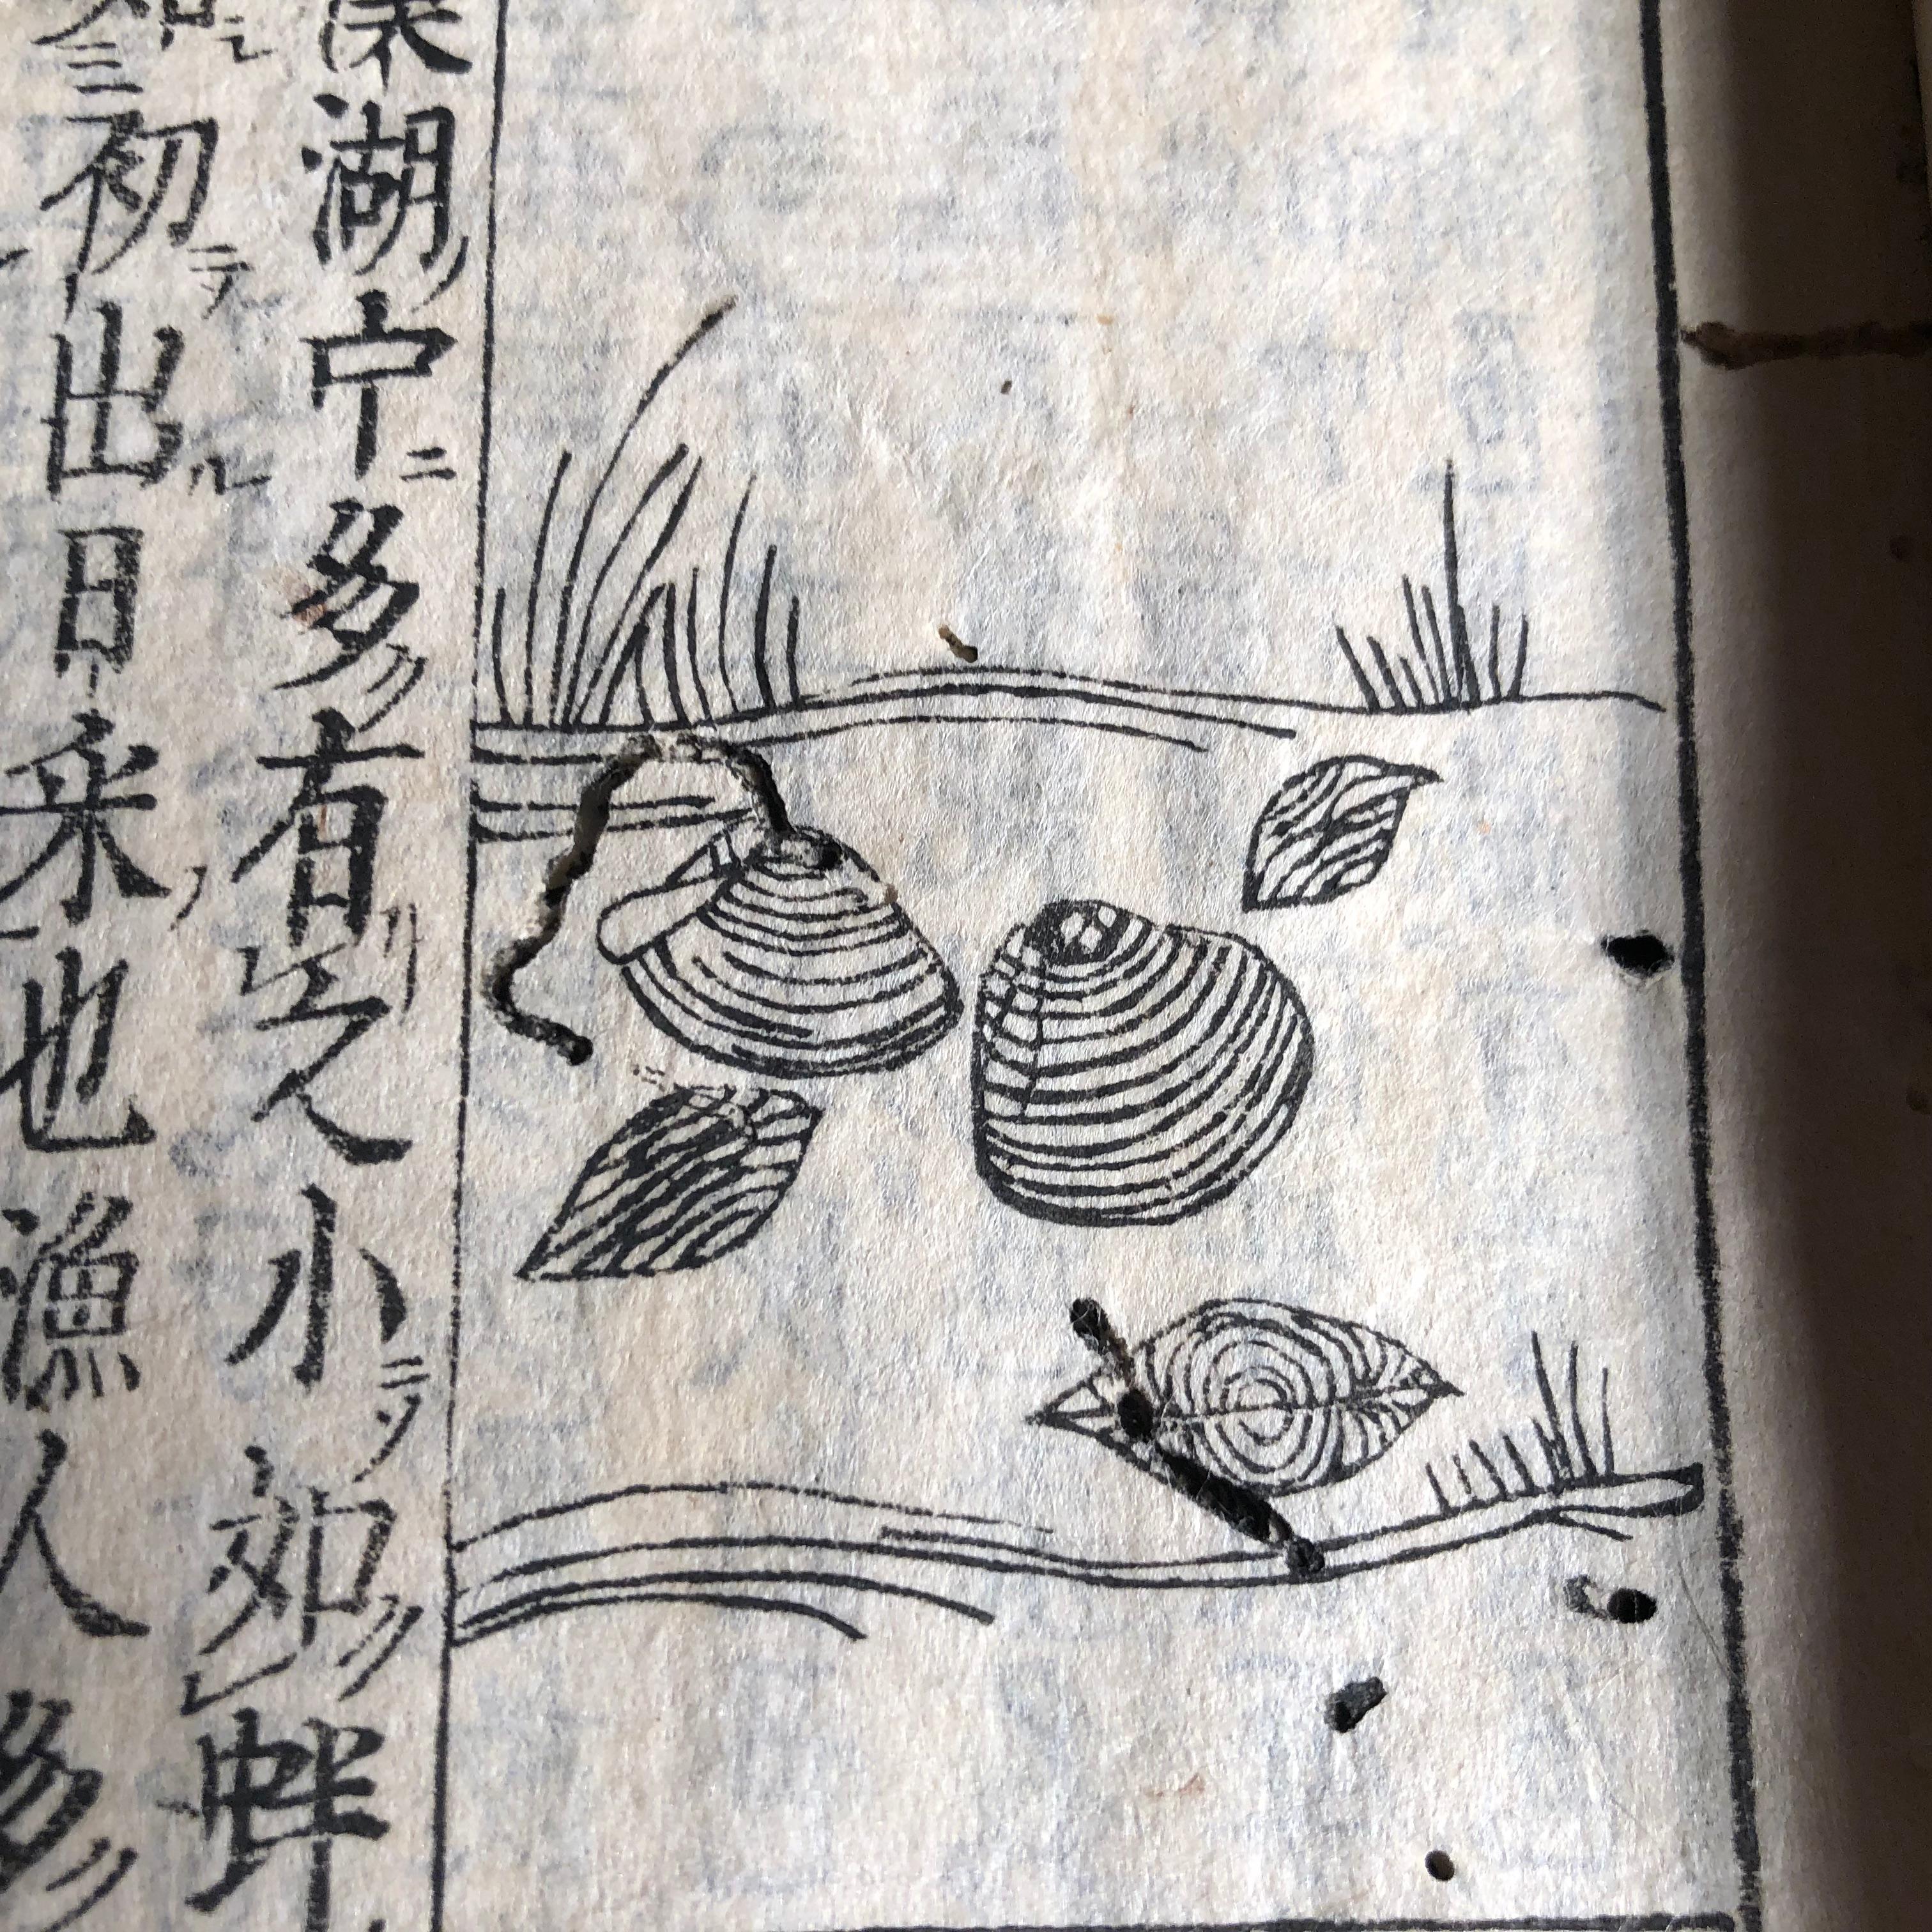 A rare 300 year old volume from Japan.

This is a complete antique signed woodblock print book 